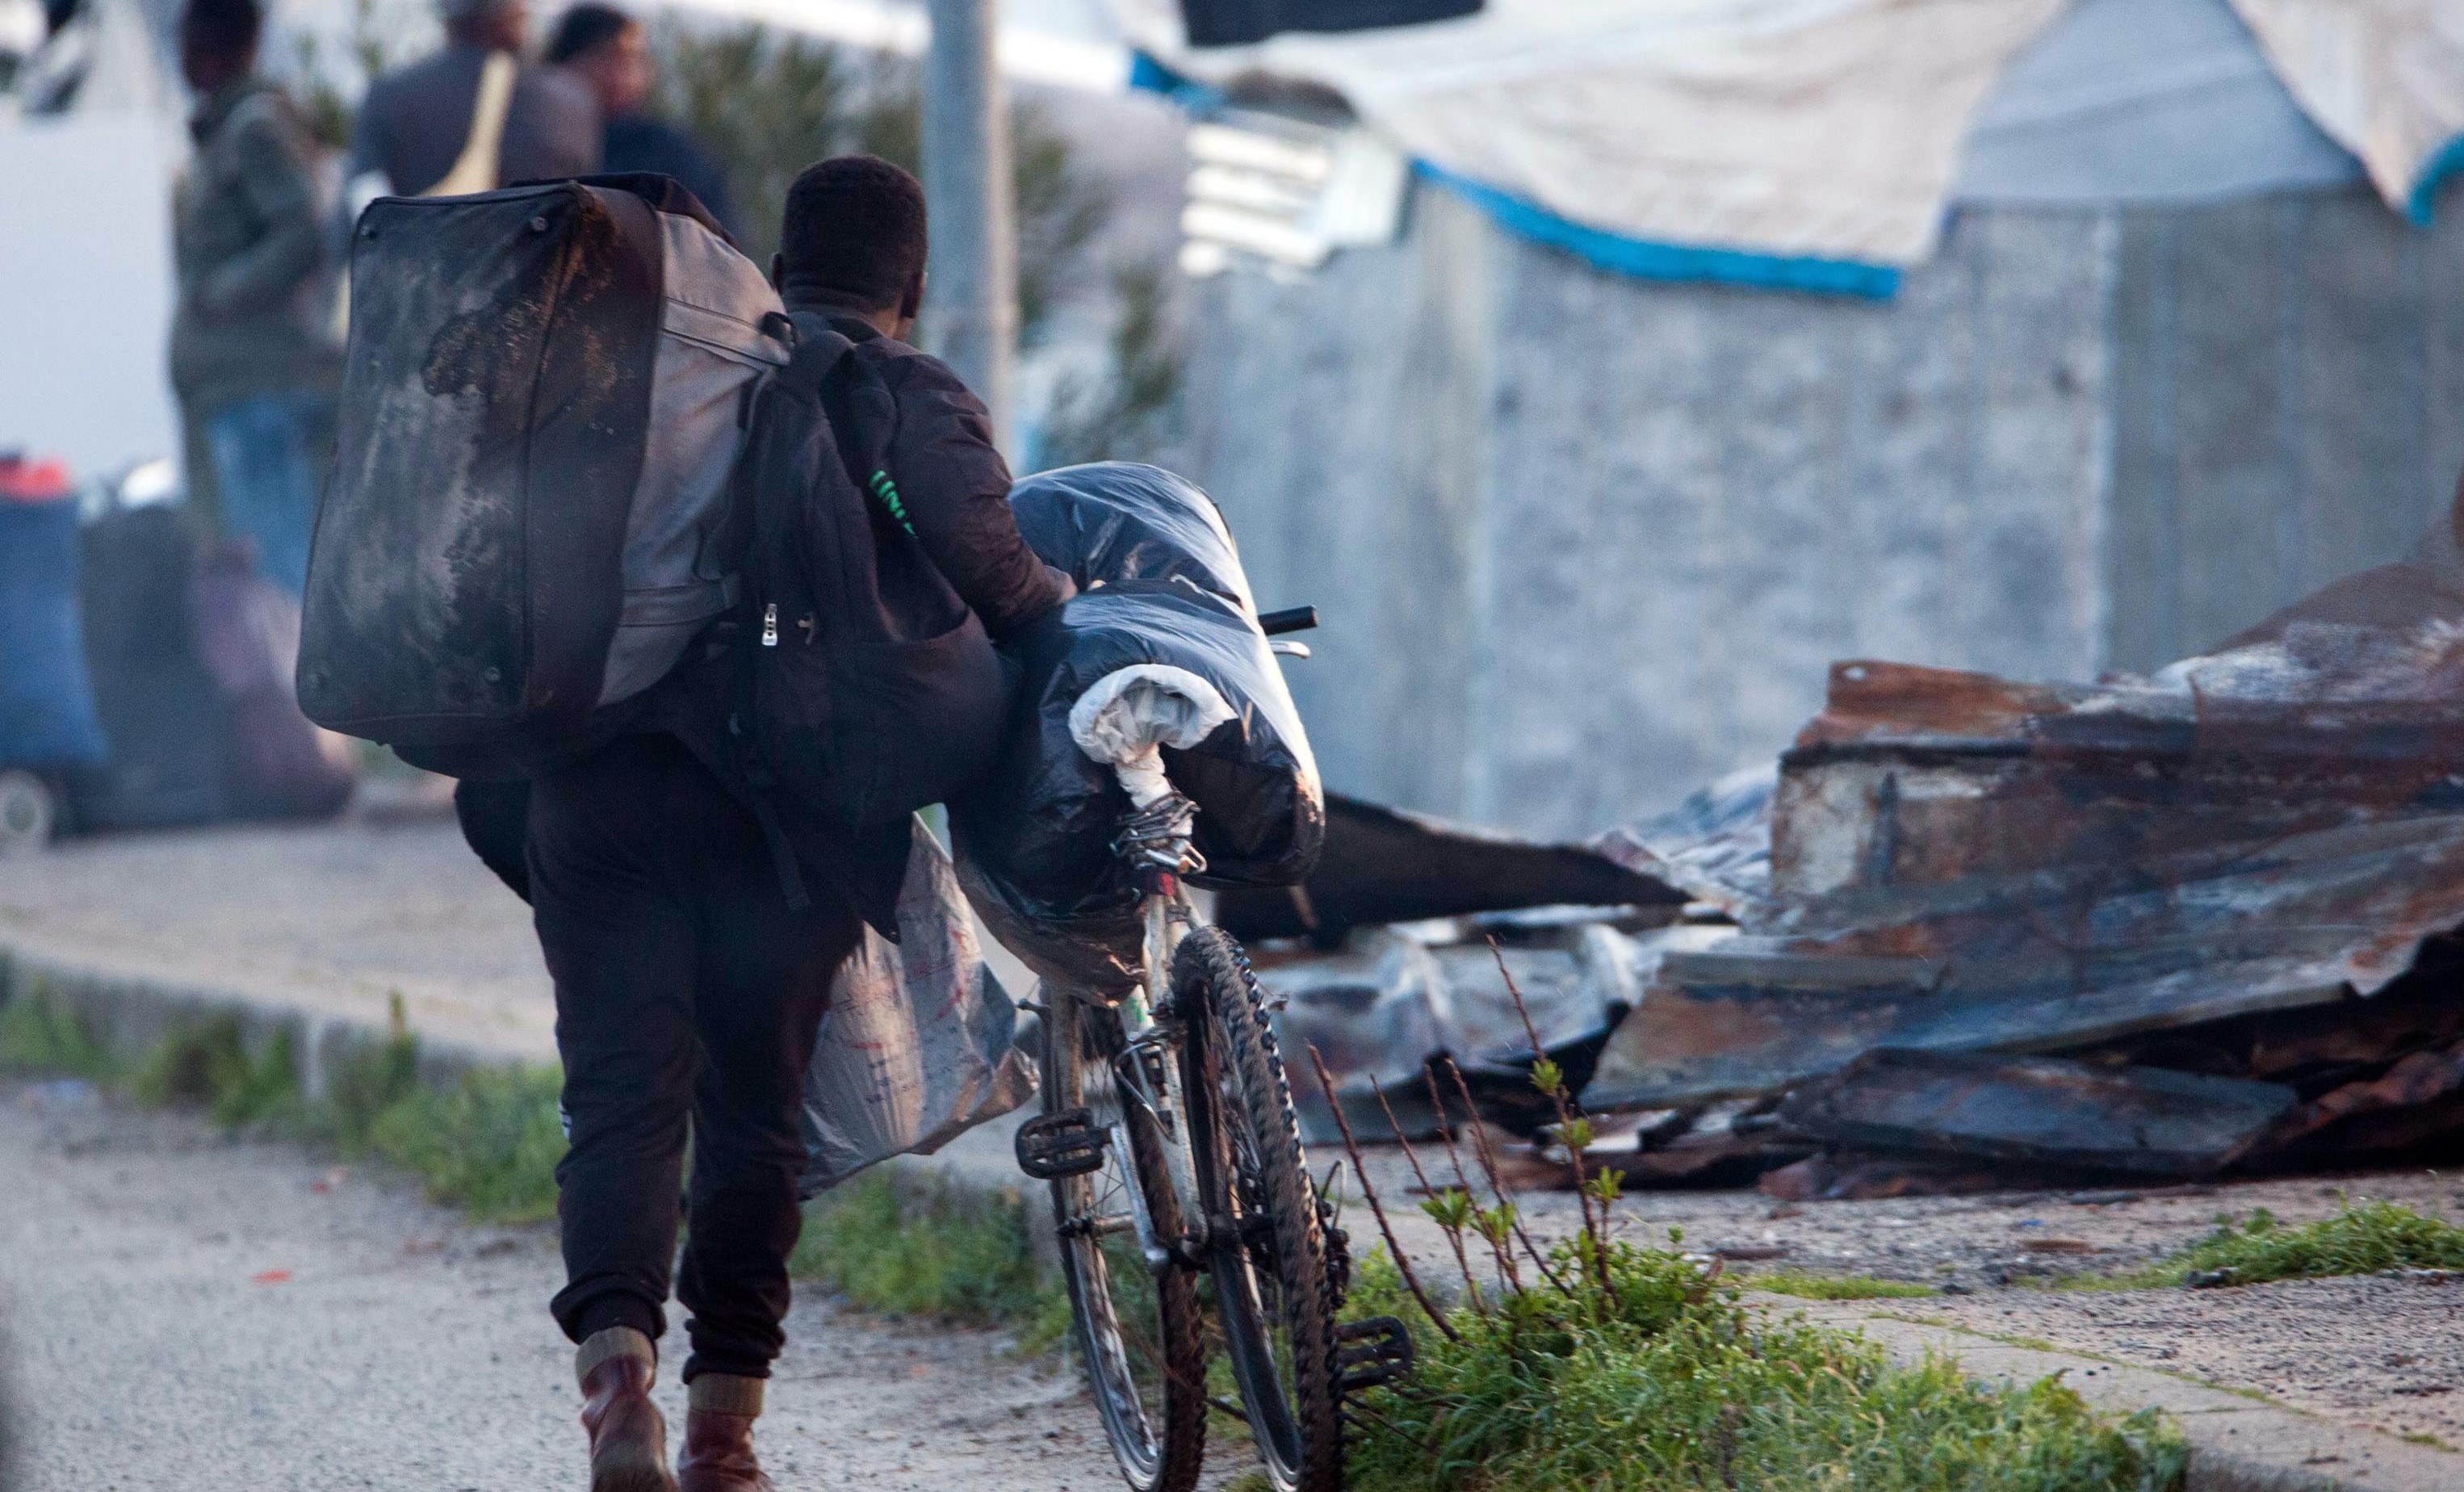 epa07416543 A migrant pushes his bicycle in the shantytown of San Ferdinando (Reggio Calabria), Italy, 06 March 2019. The clearing operations of the San Ferdinando shantytown began on 06 March. Around 900 people will be transferred to reception centers.  EPA/MARCO COSTANTINO